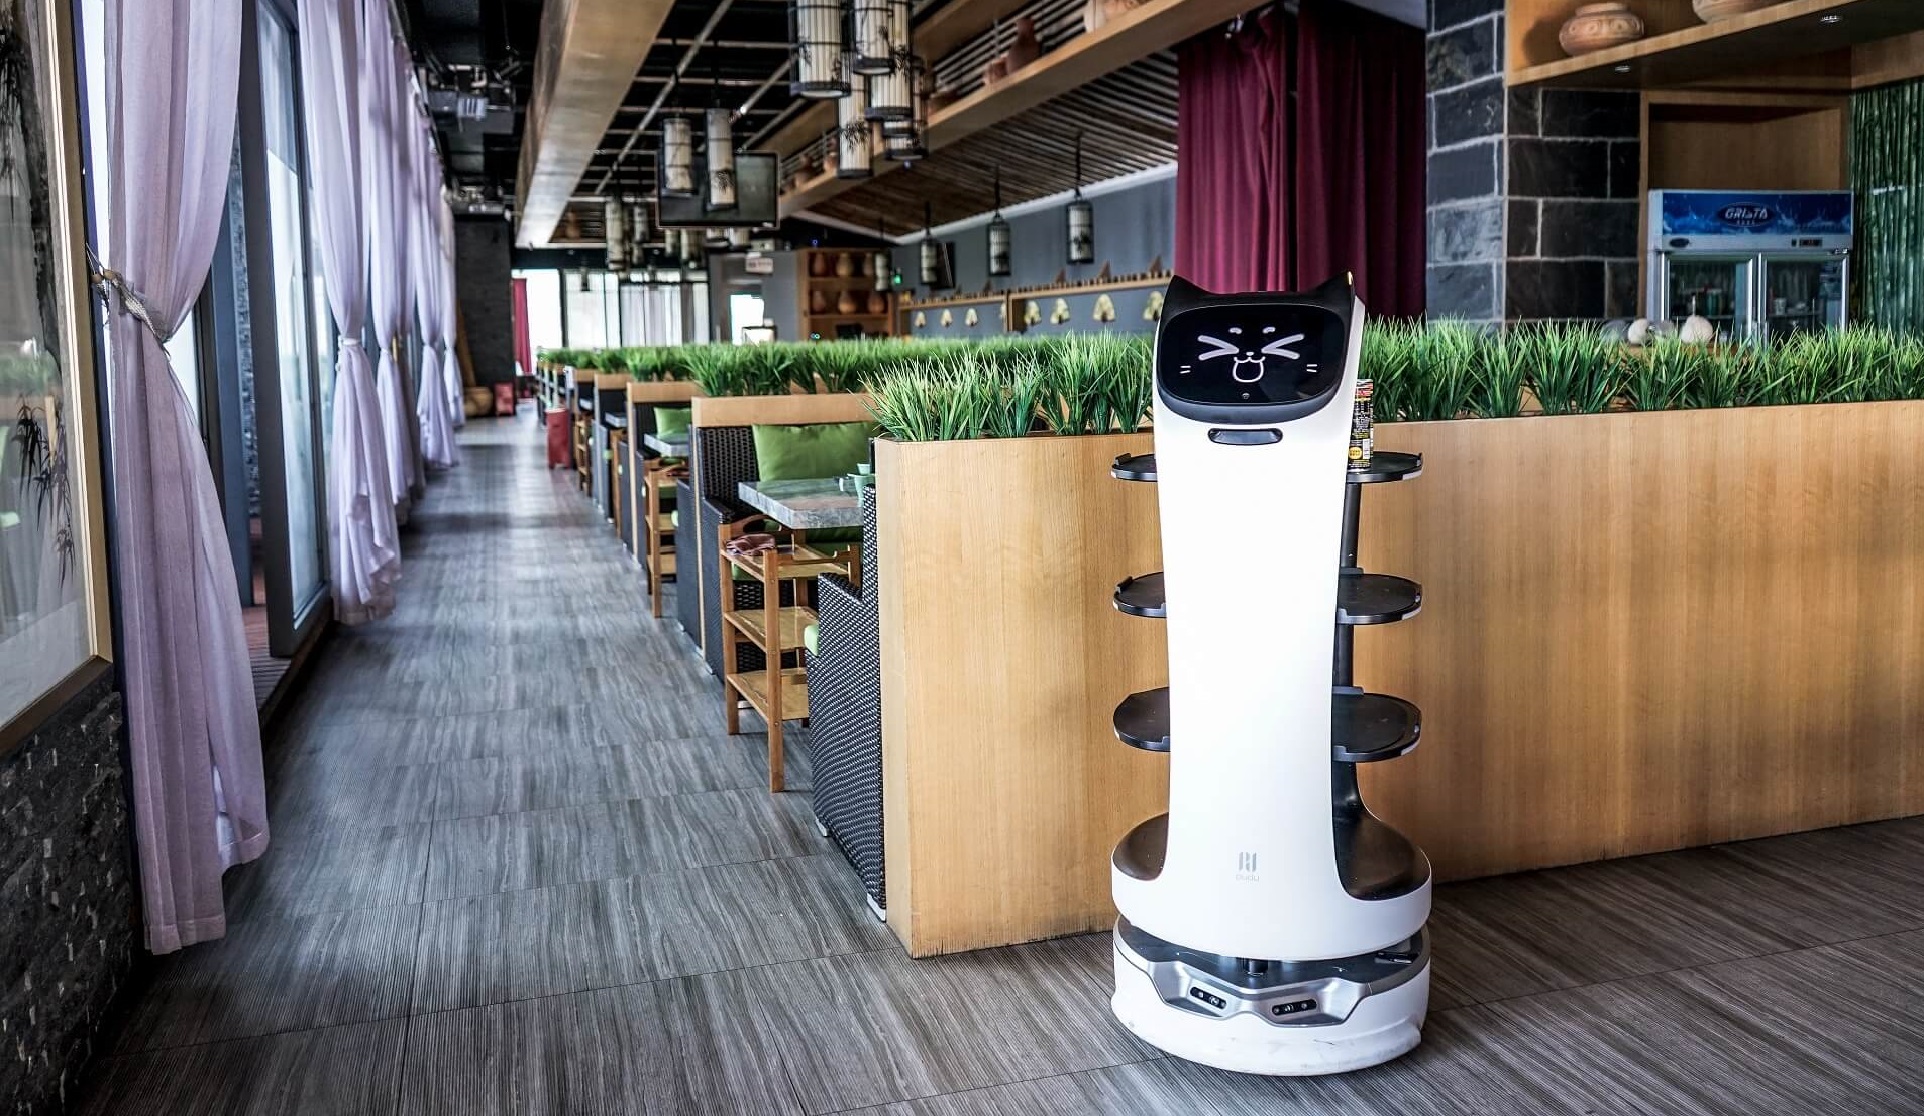 What are the arguments in favor of using robots in the catering industry?